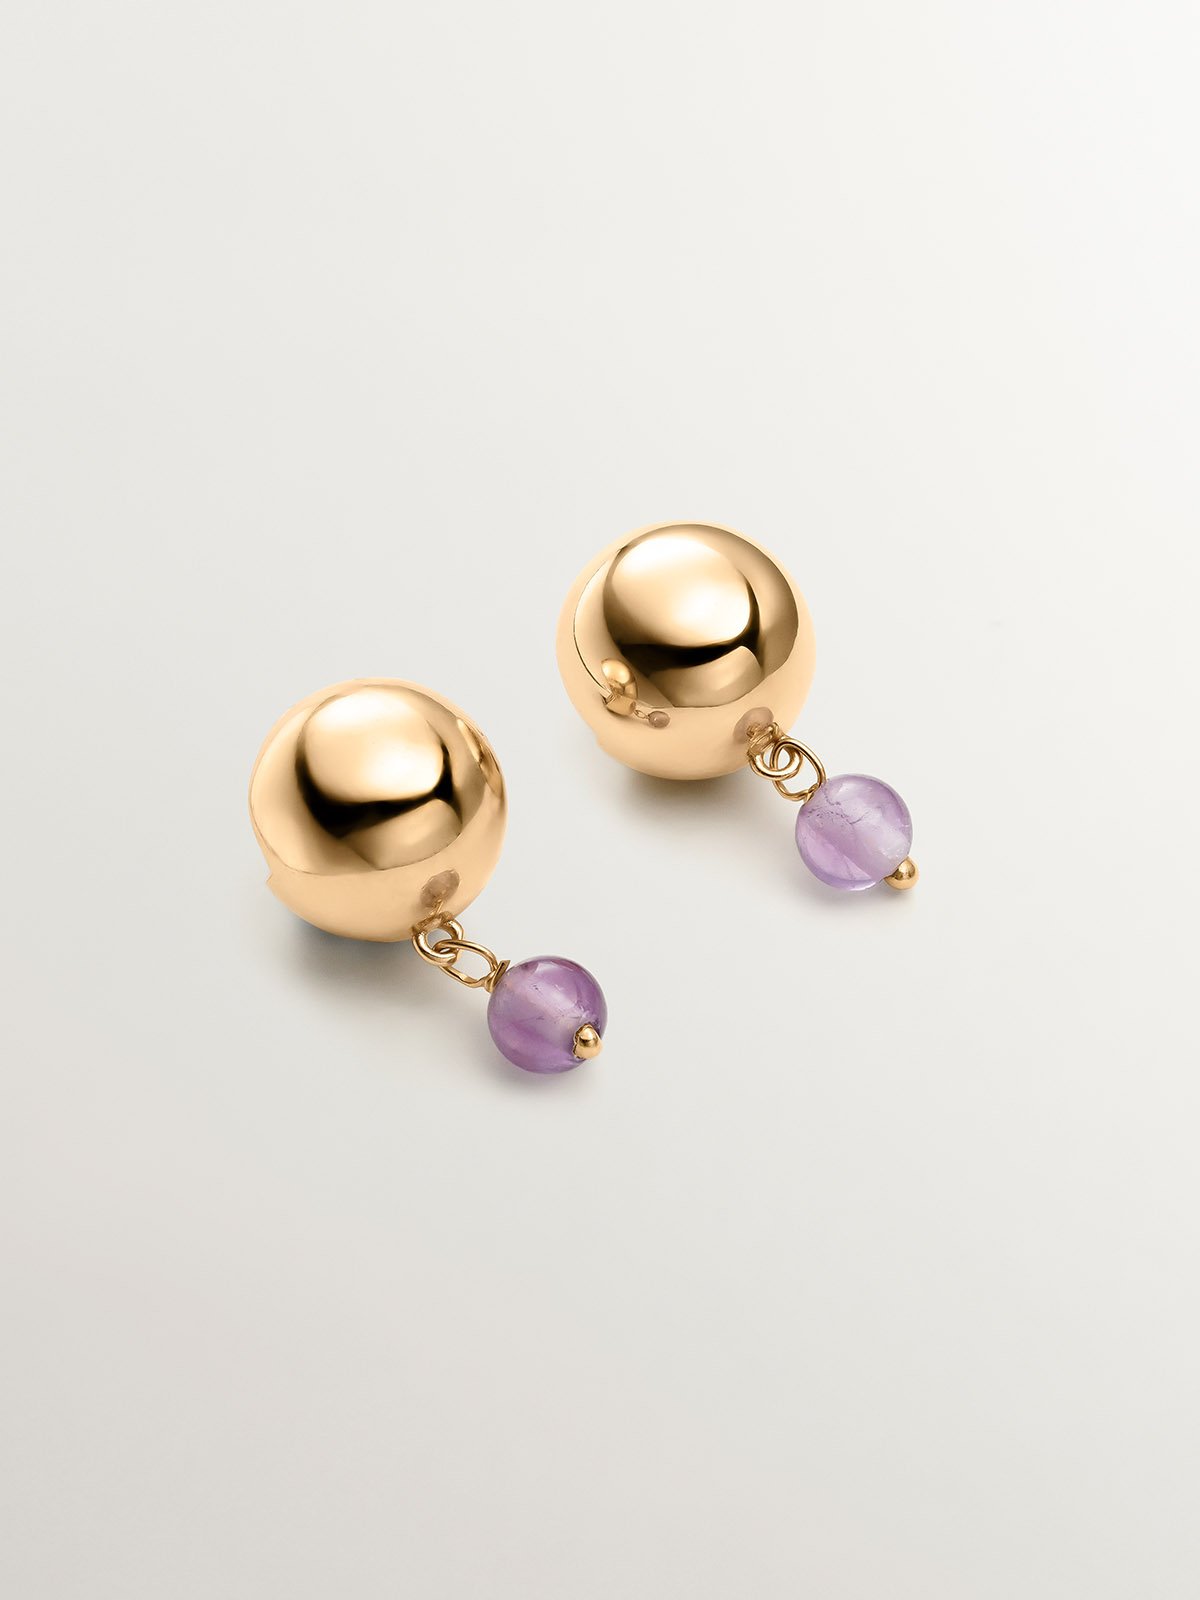 925 silver earrings bathed in 18k yellow gold with amethyst purple